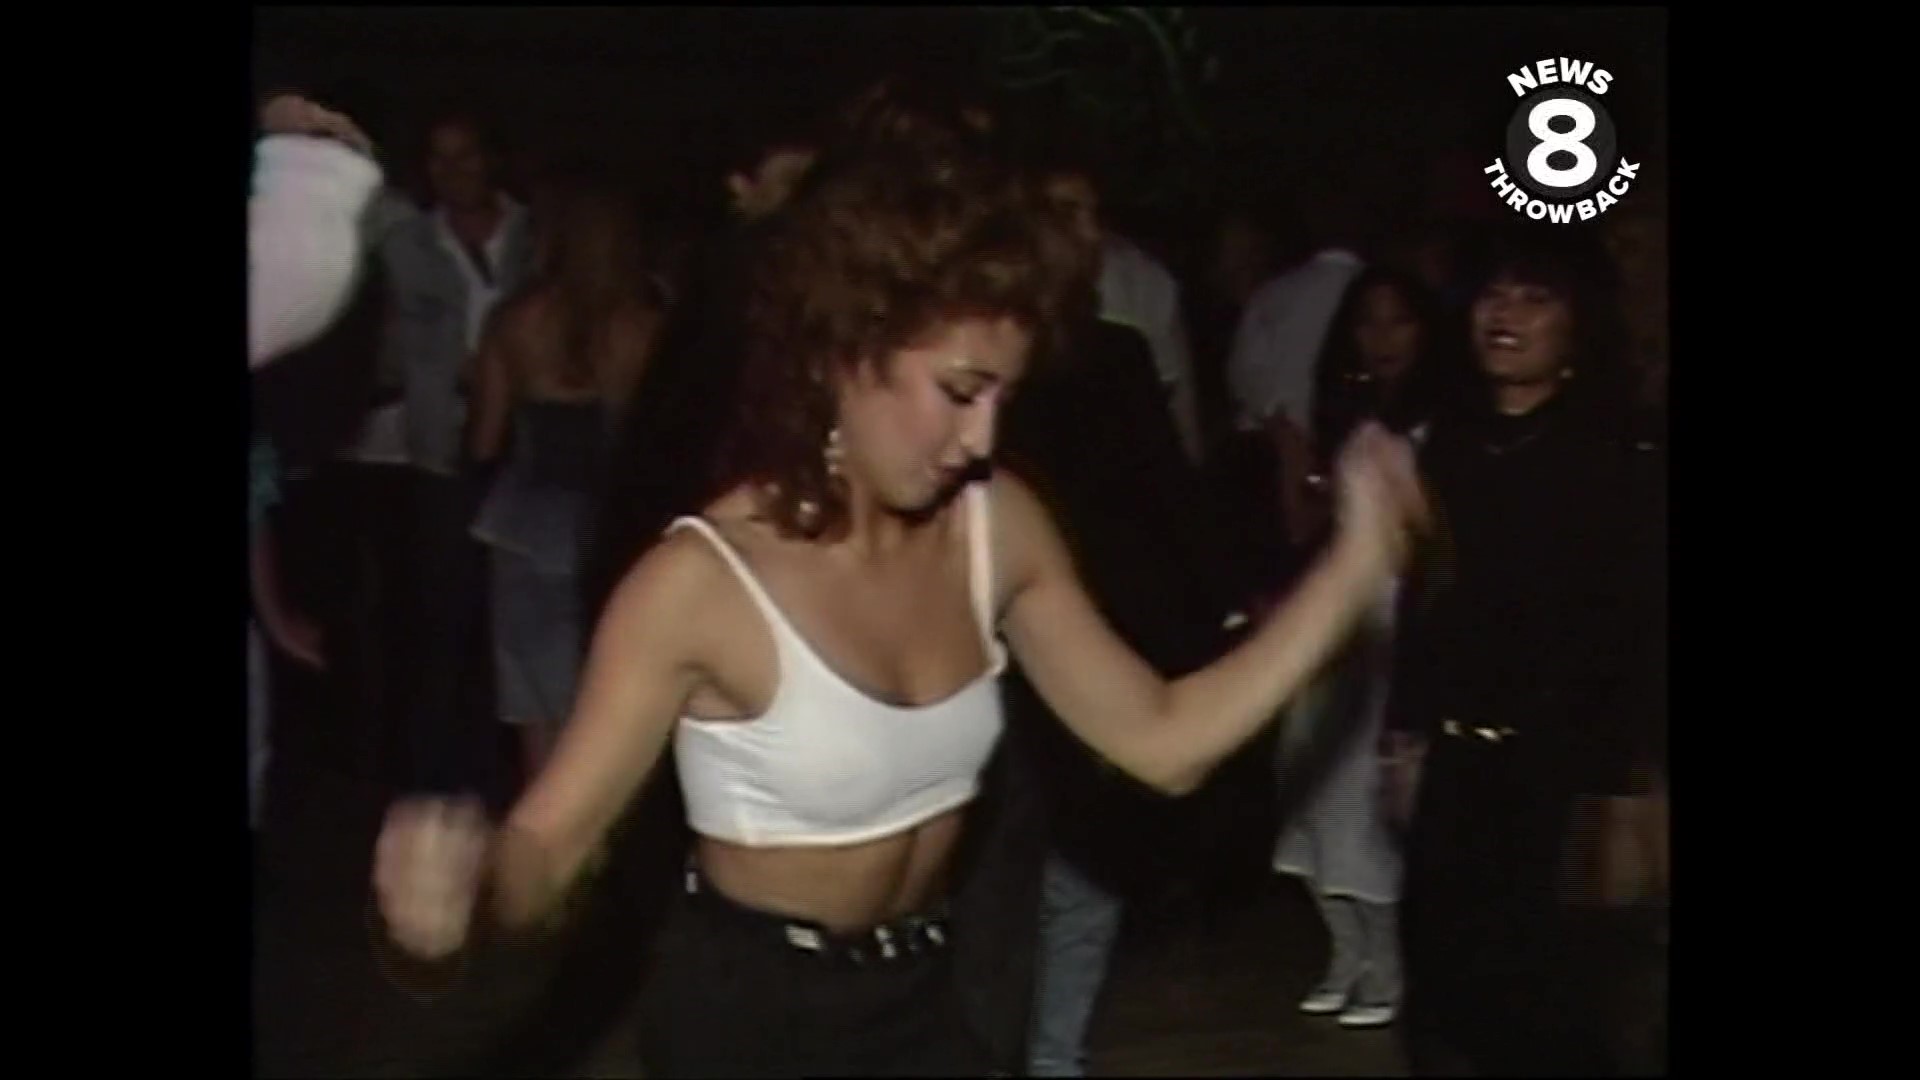 Wild and crazy scenes in the clubs of L.A. in 1987